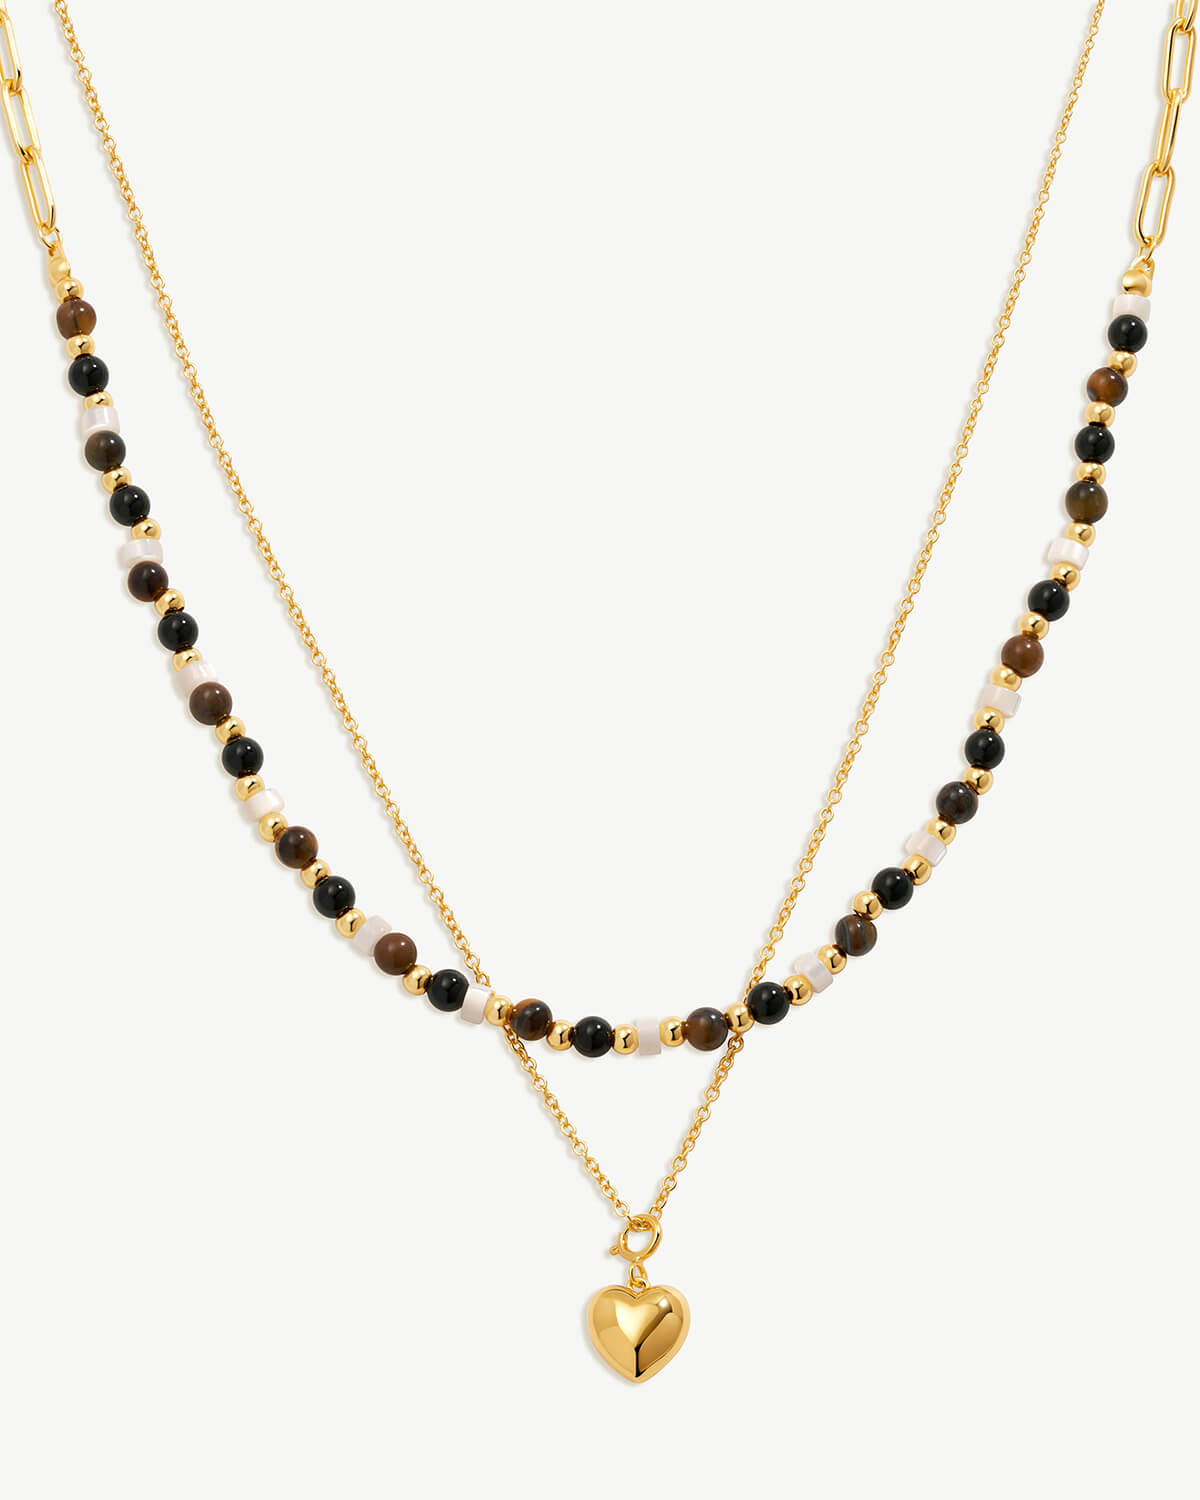 Elegant Multi-Layered Gold Chain Necklace with Heart Pendant